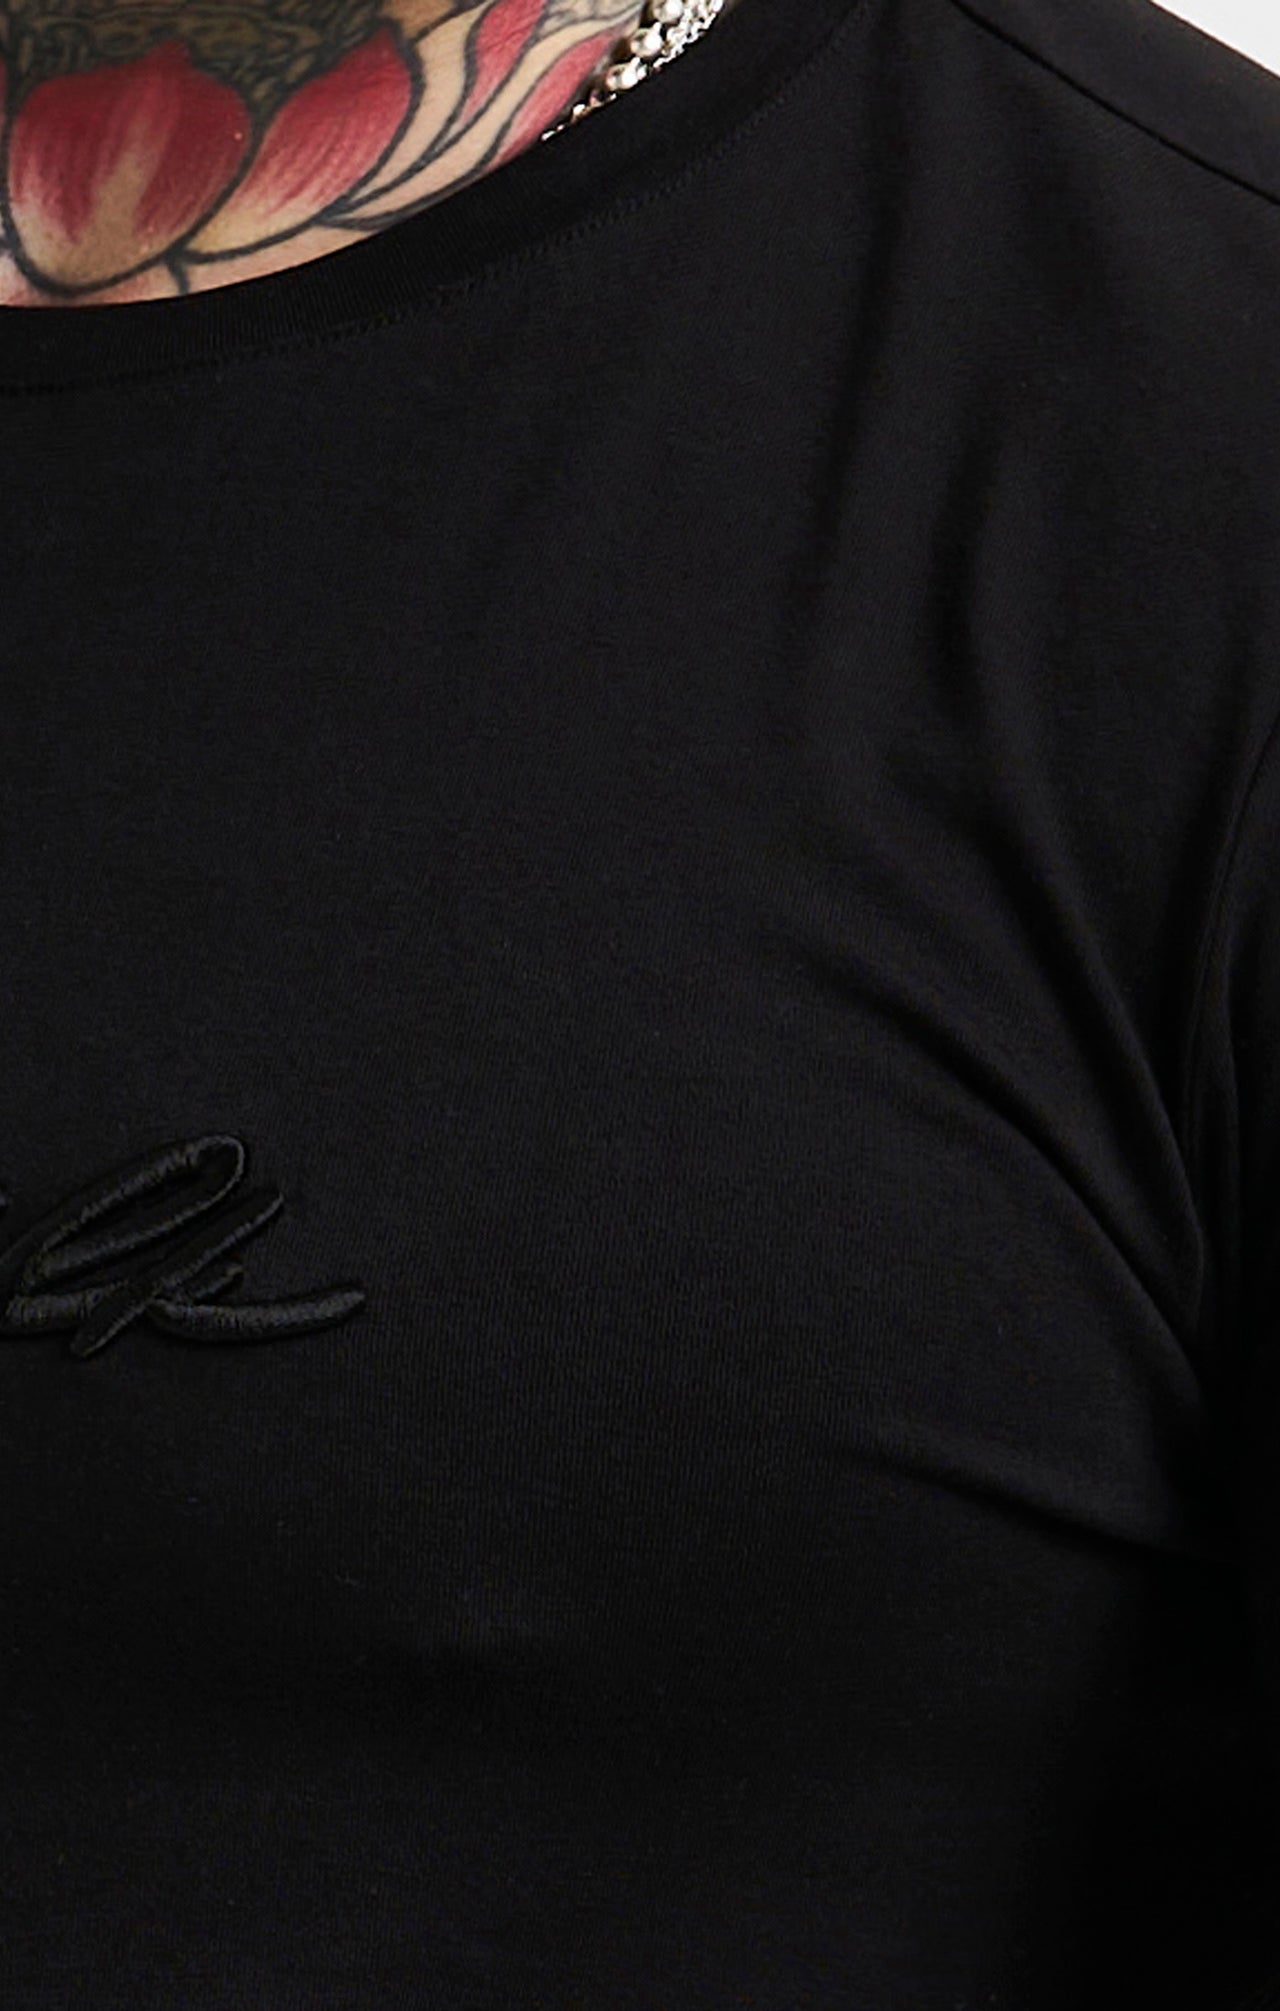 Black Script Embroidery Muscle Fit T-Shirt (1)